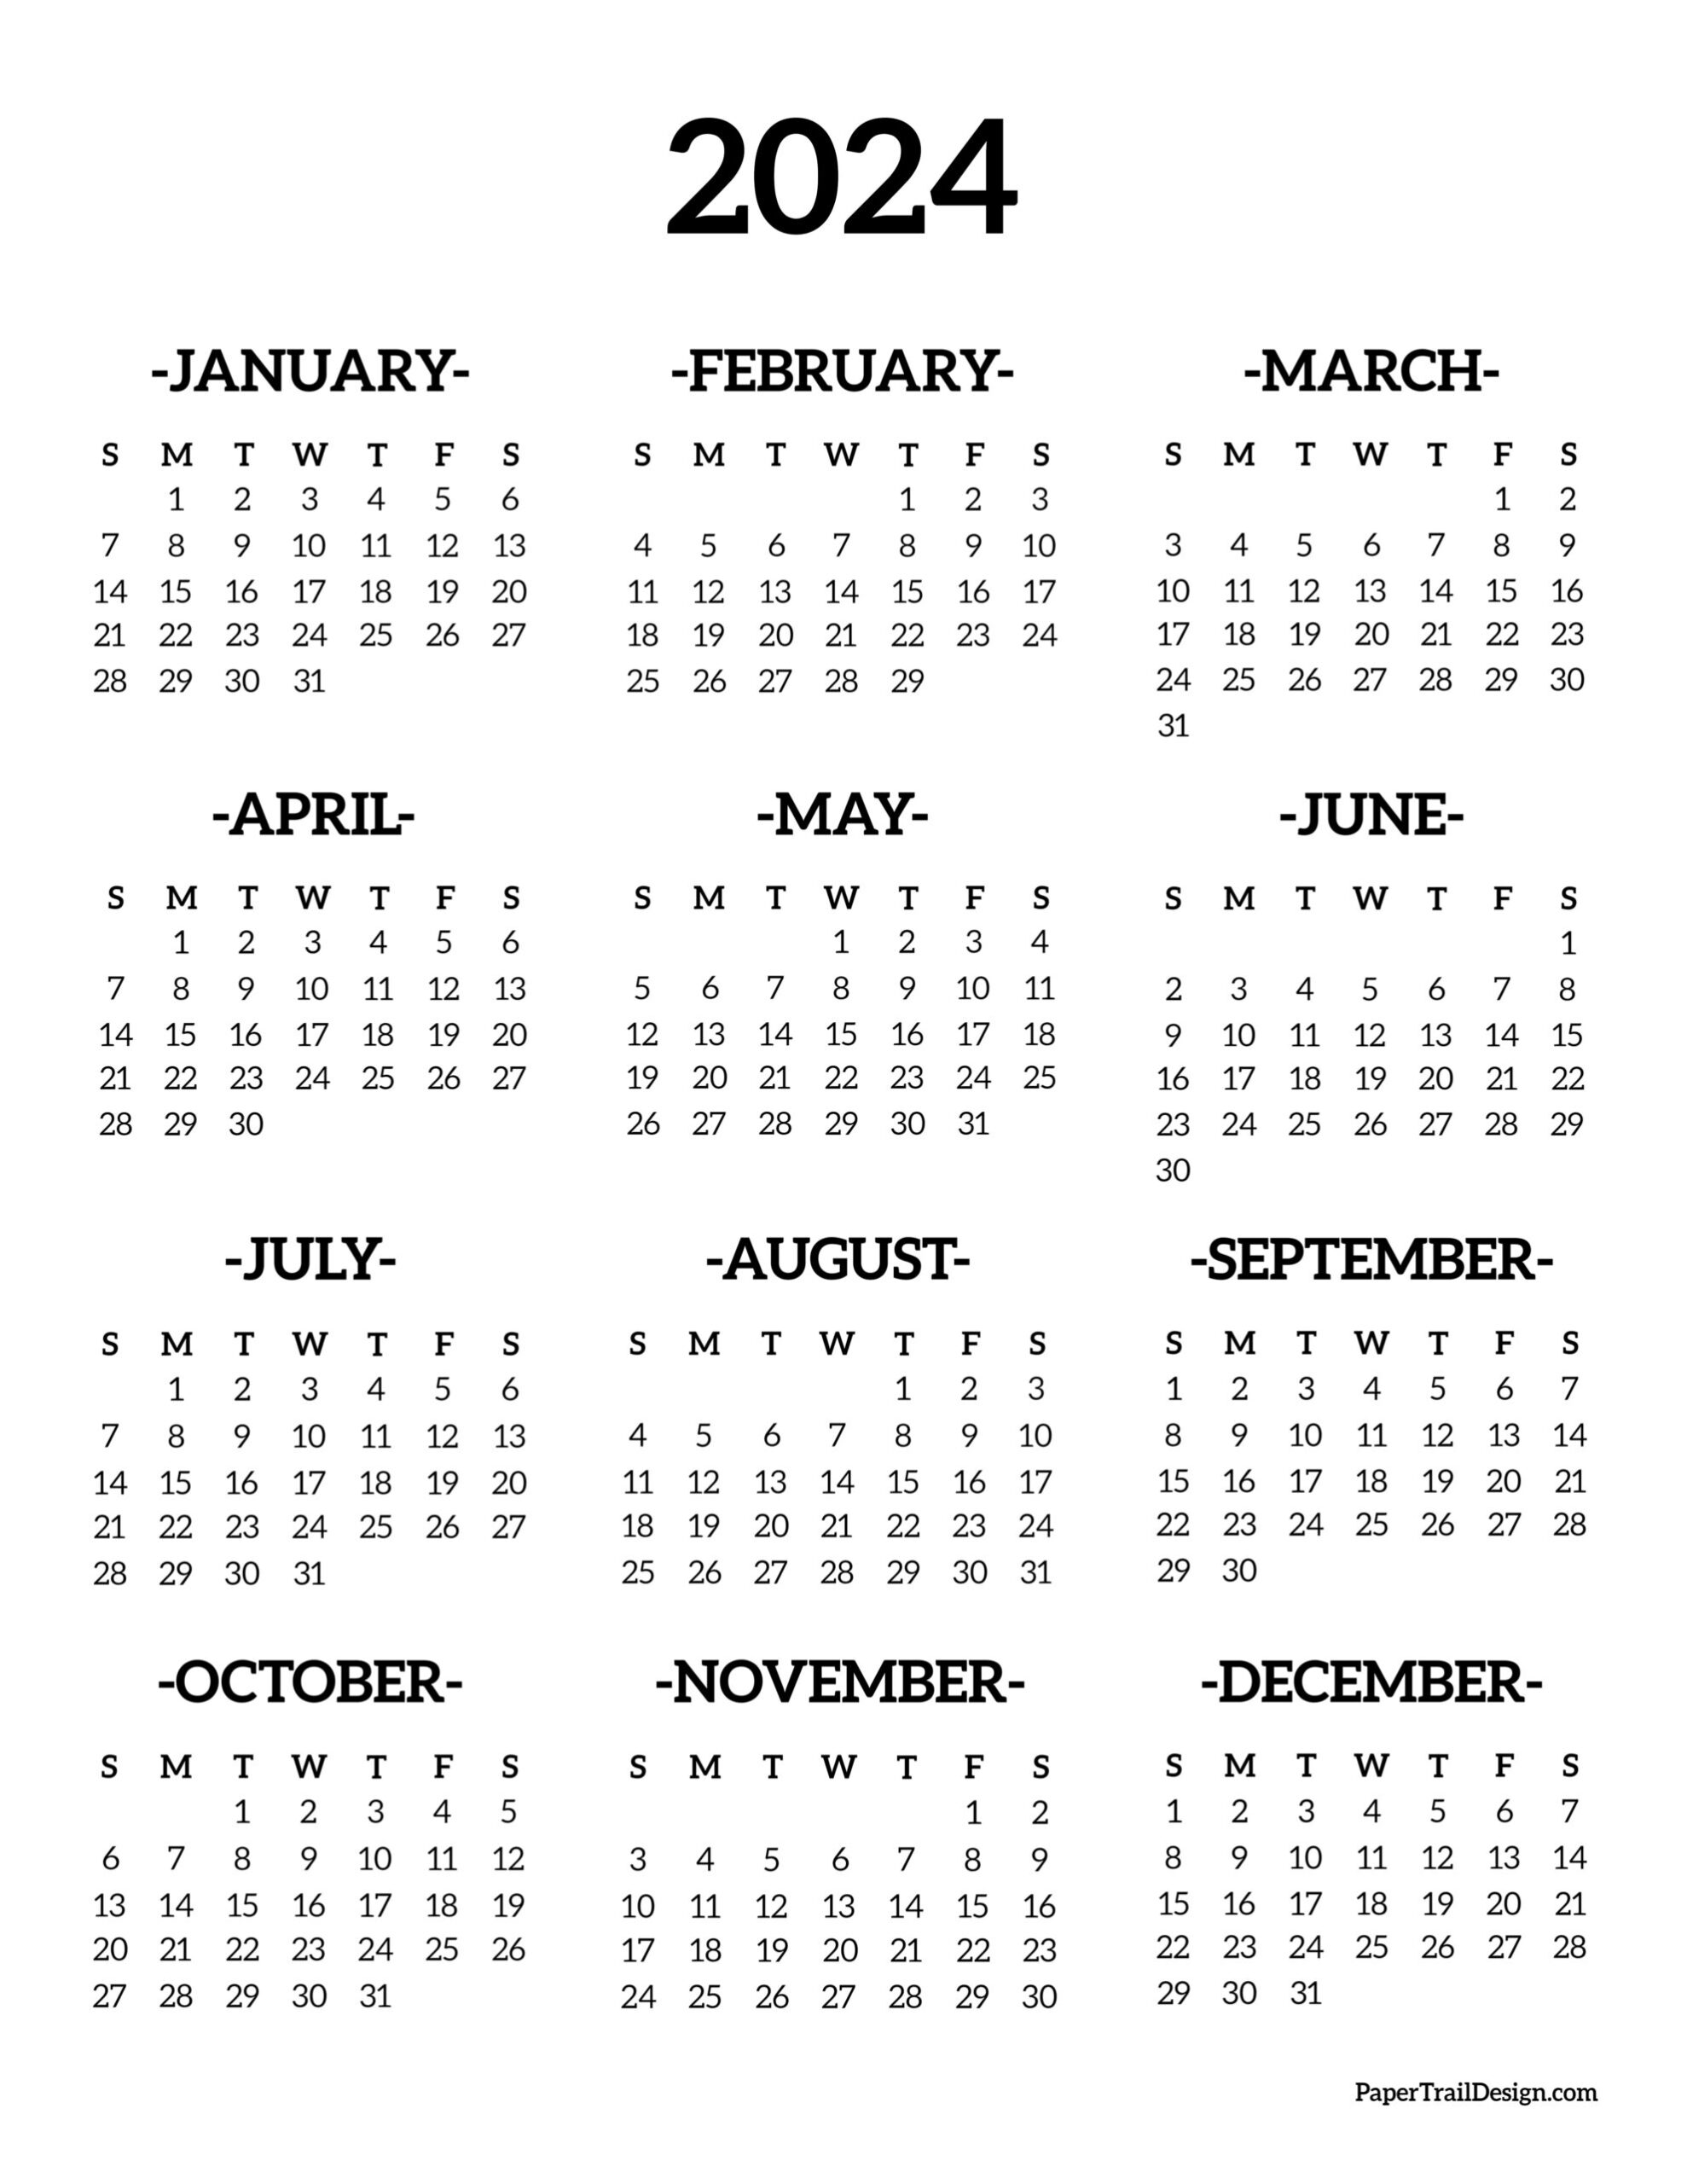 Calendar 2024 Printable One Page - Paper Trail Design for Printable Yearly Calendar 2024 One Page